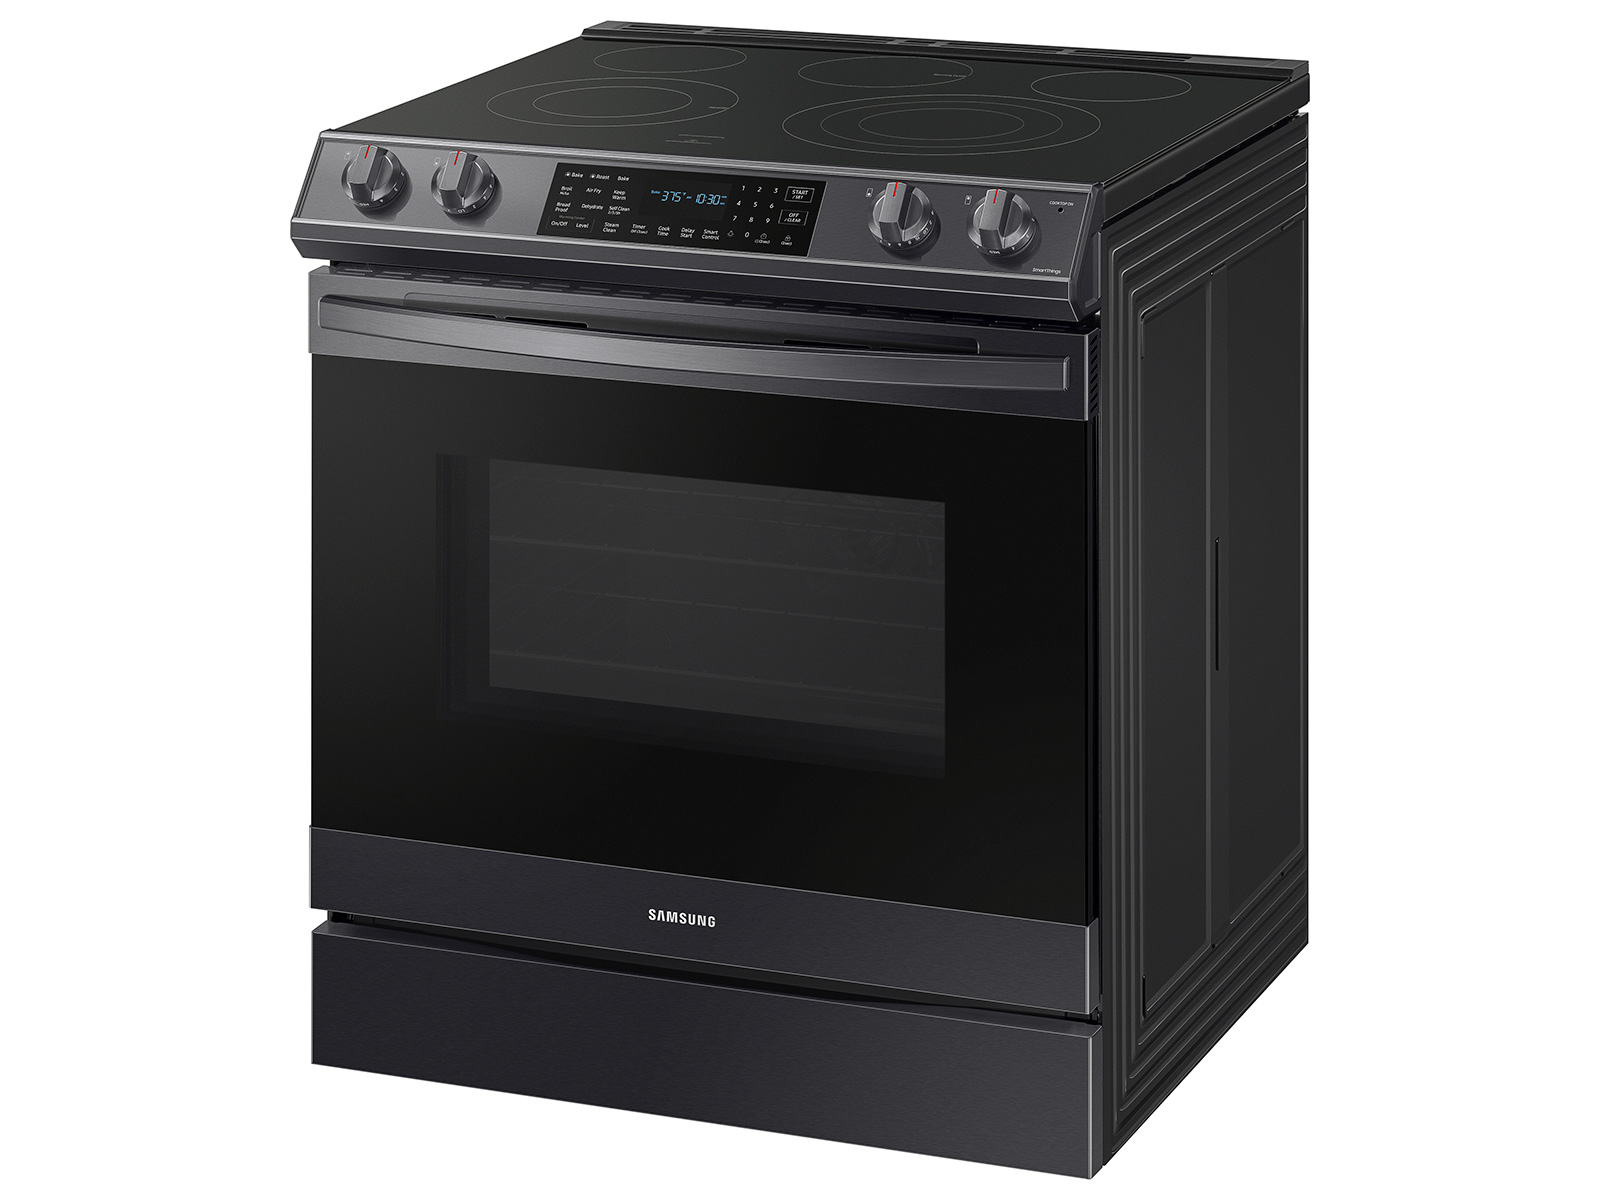 Samsung 6.3 Cu. ft. Slide-in Electric Range with Air Fry, Black Stainless Steel - NE63T8511SG